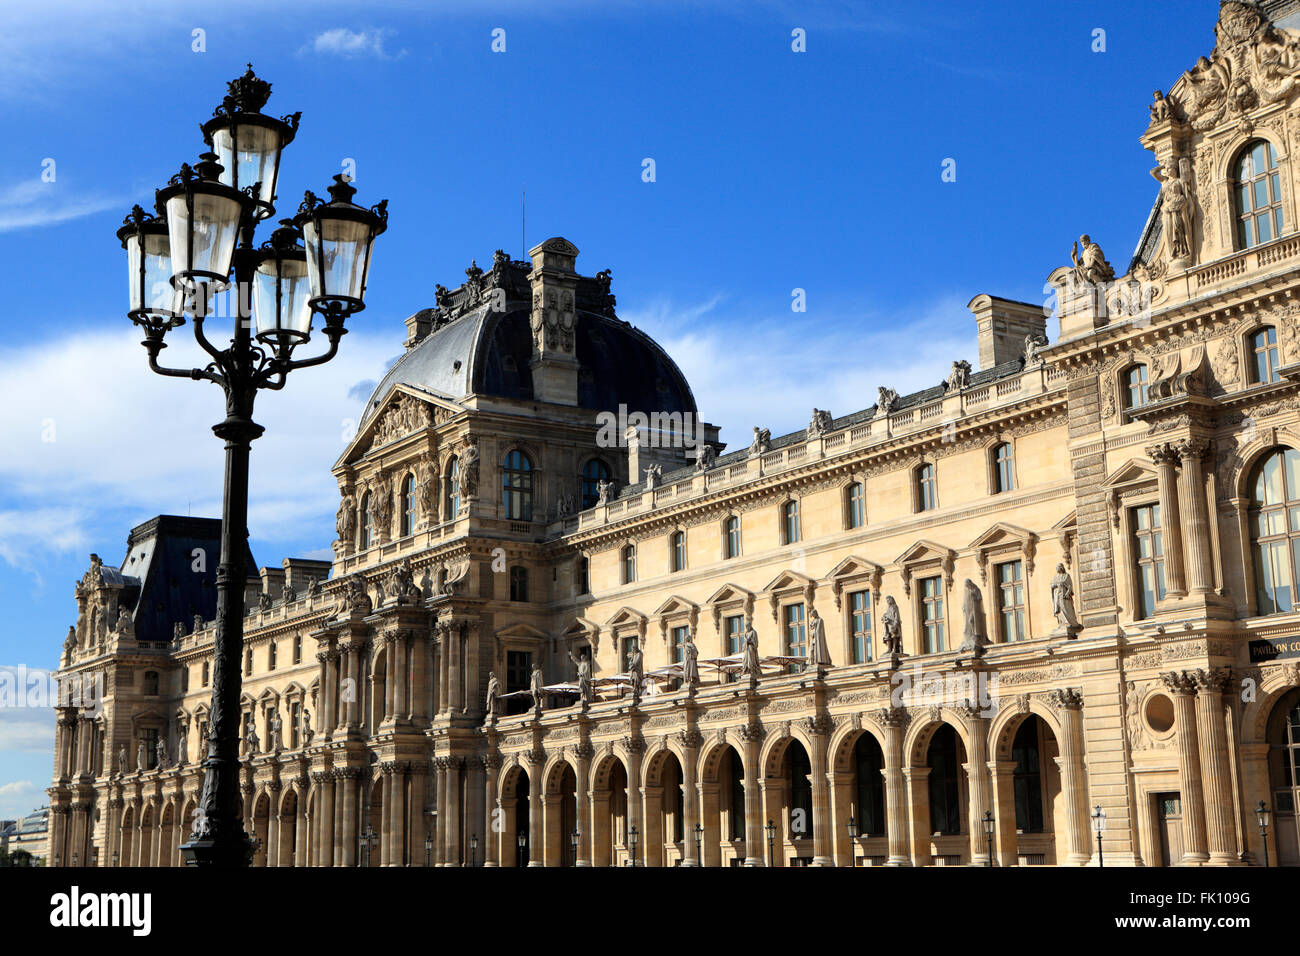 Renaissance architecture and street lamps at the Louvre Museum in Paris bathed in warm late afternoon light. Stock Photo